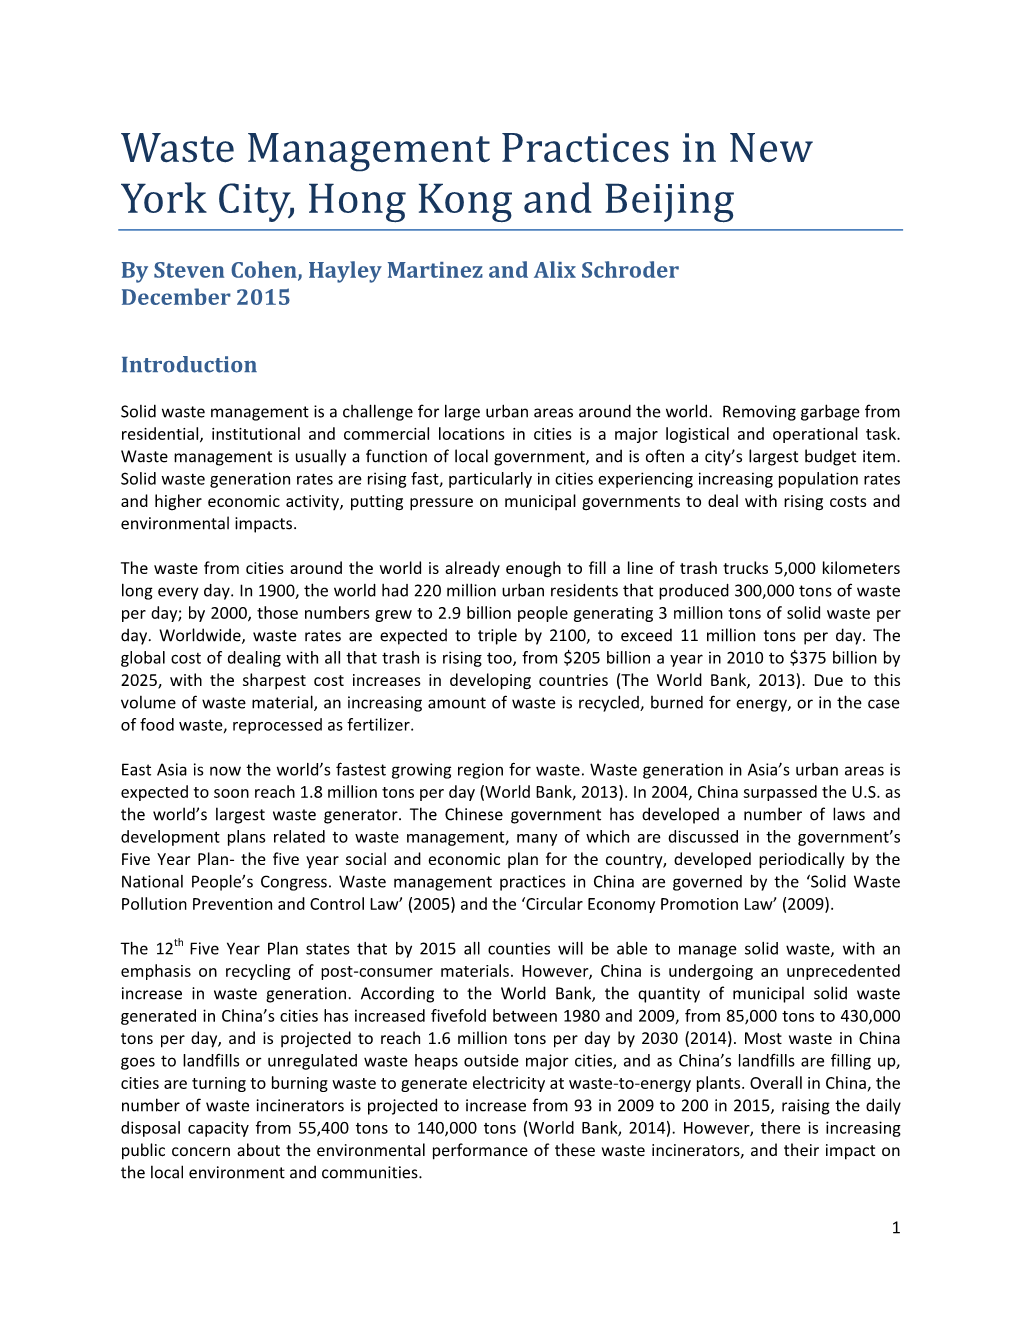 Waste Management Practices in New York City, Hong Kong and Beijing